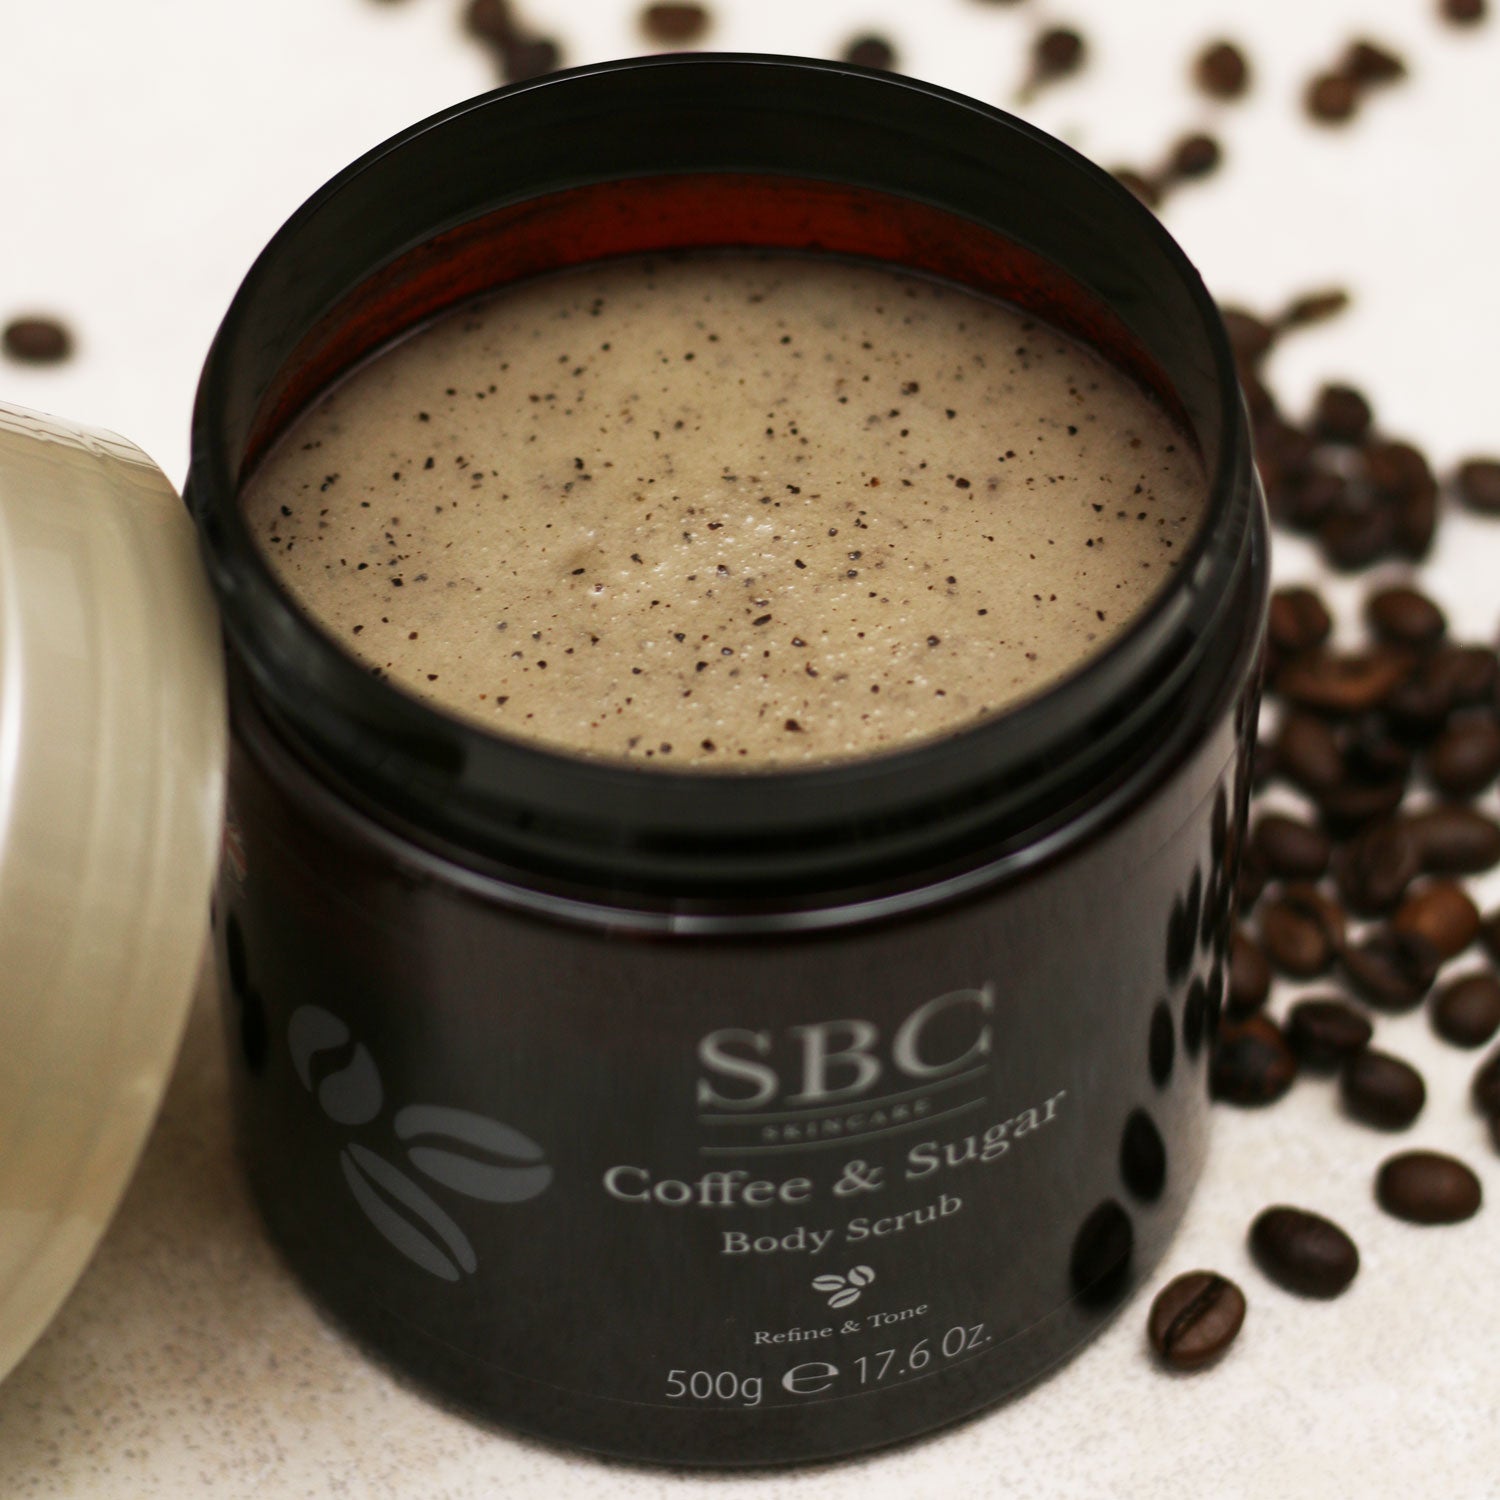 Coffee & Sugar Body Scrub 500g with lid open and coffee beans sprinkled around the base